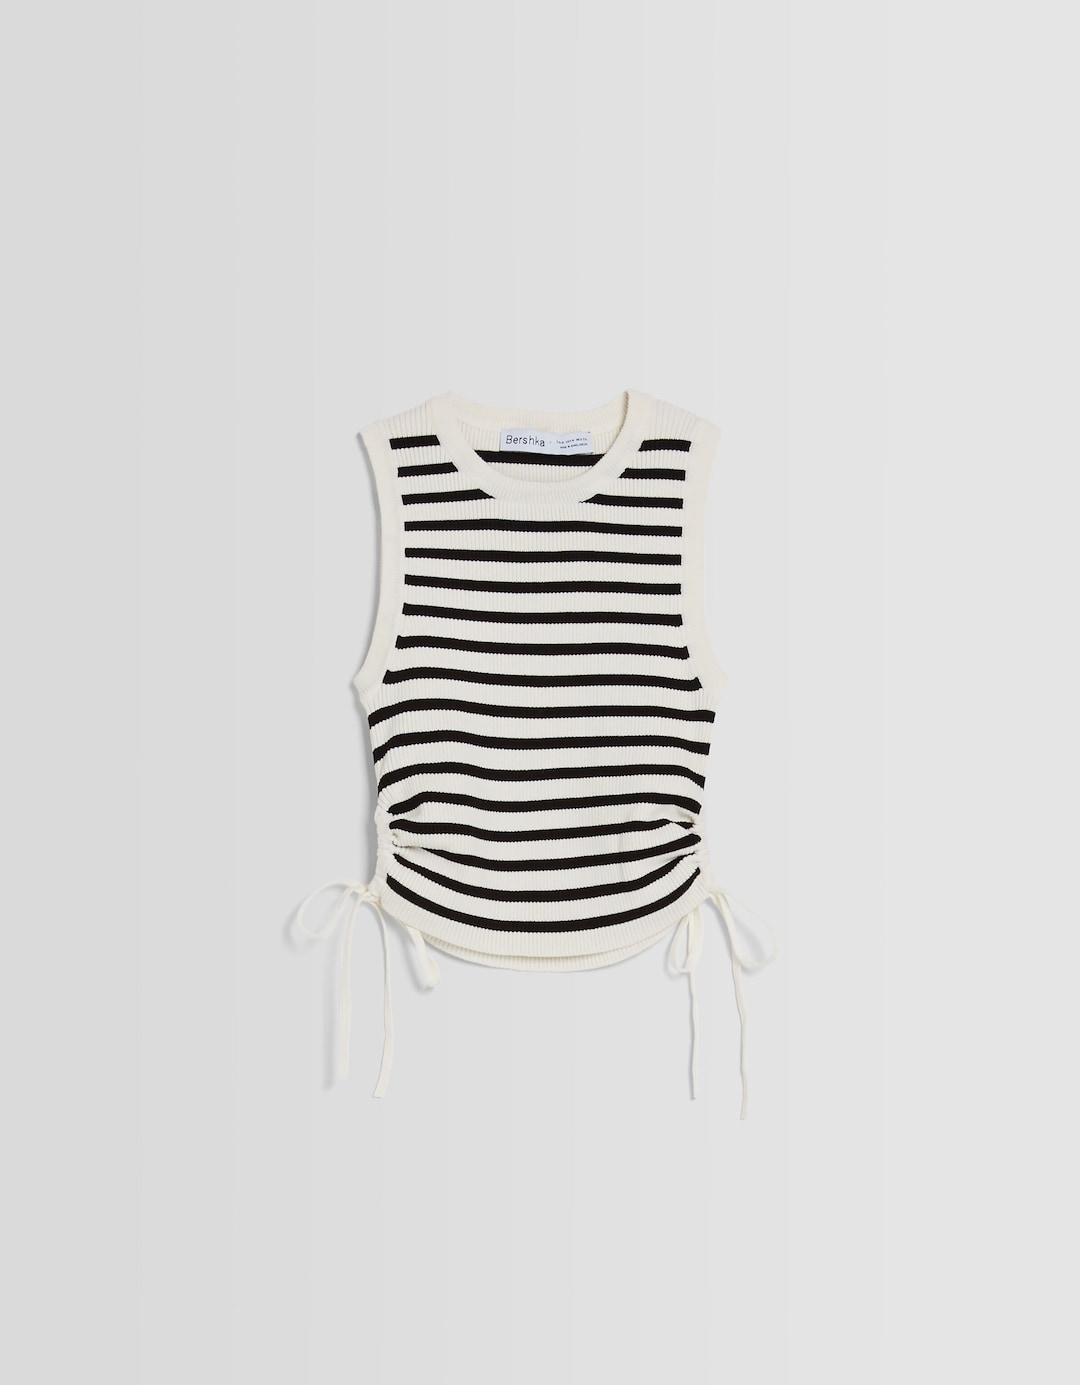 Sleeveless gathered knit top with ties